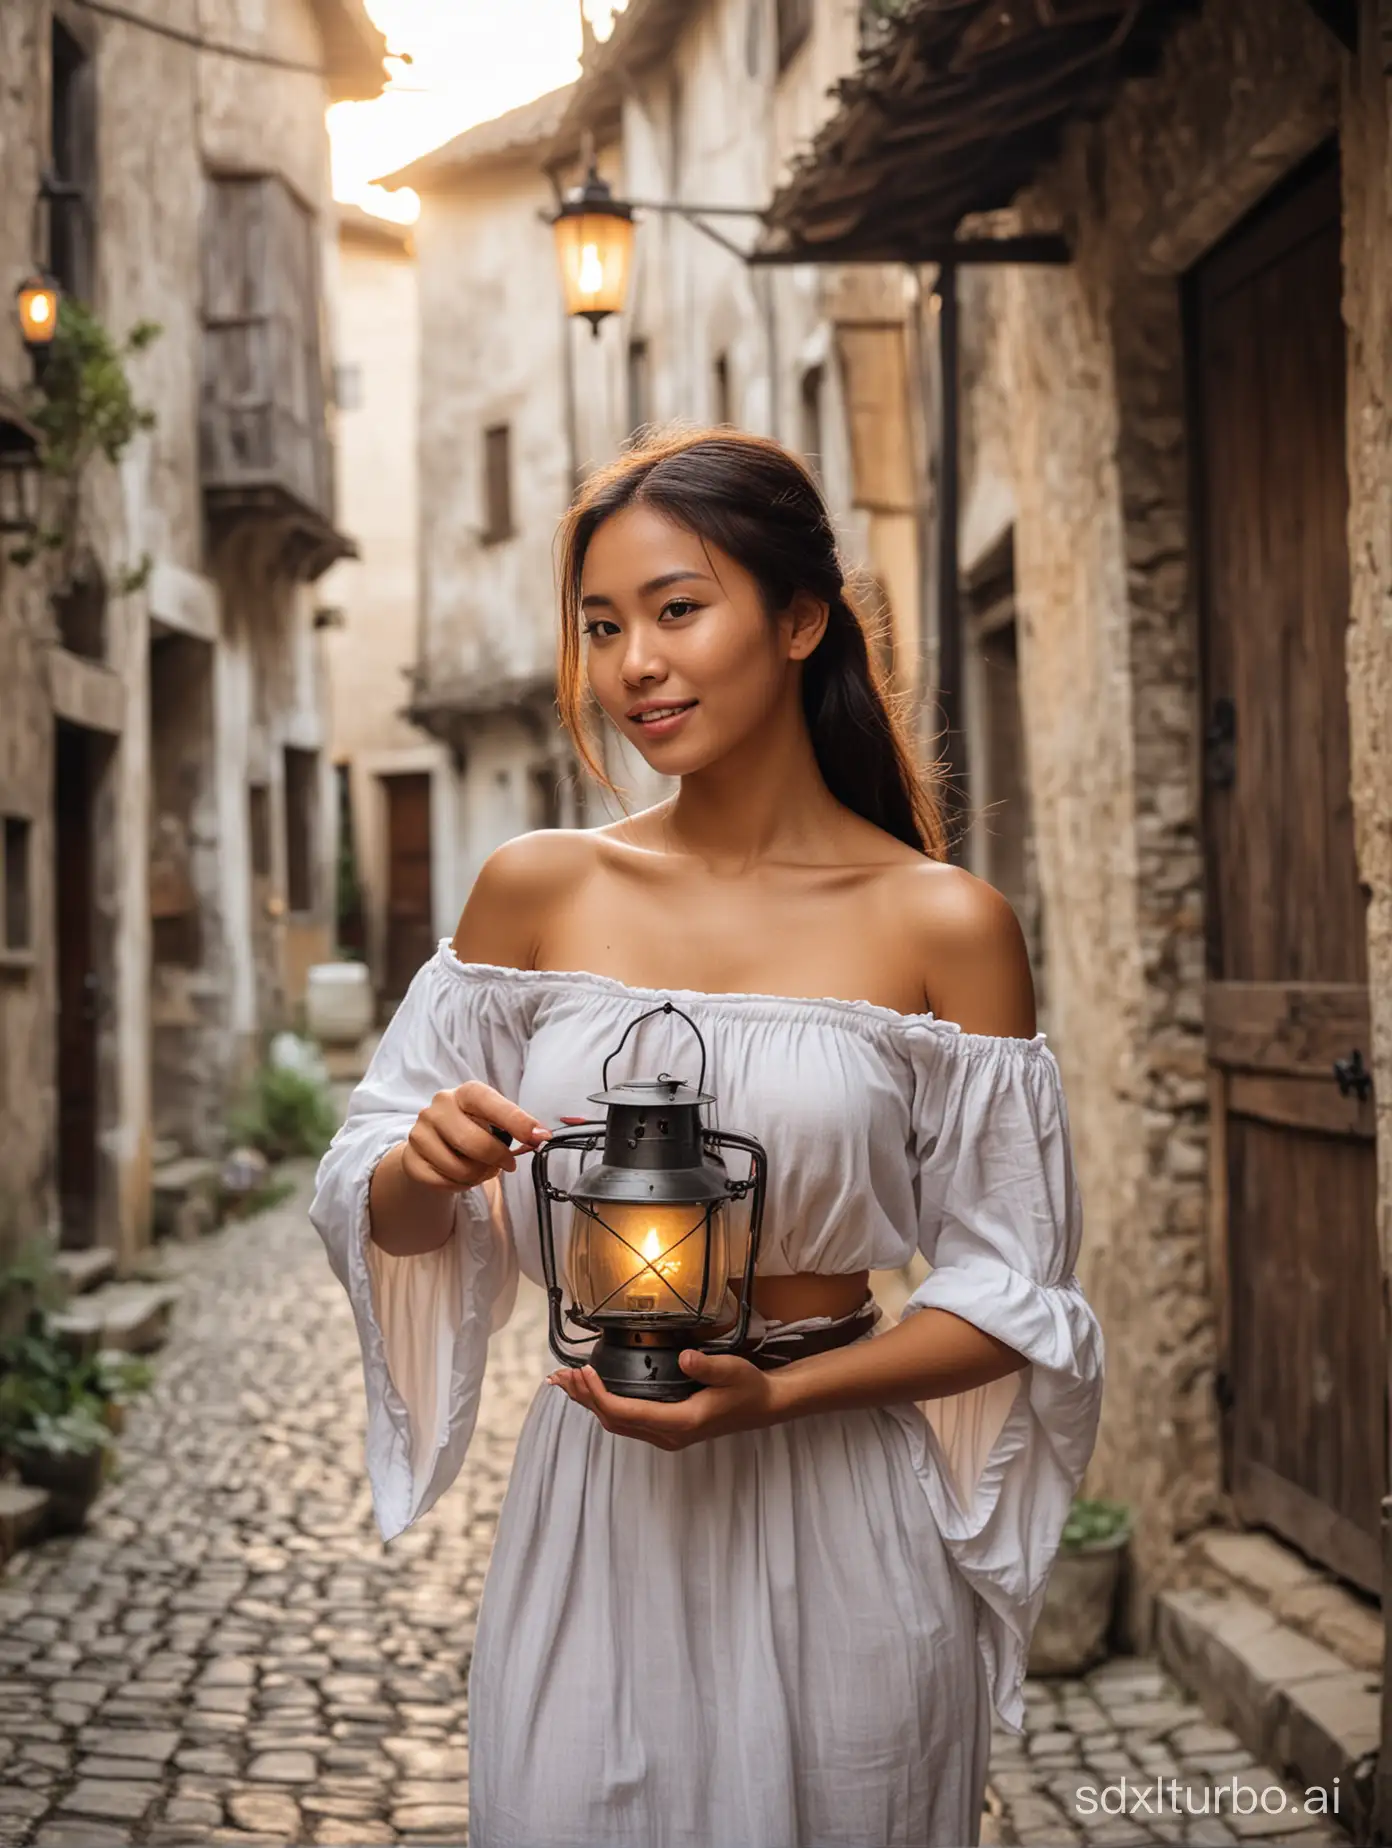 20 years old Filipina woman holding a lantern. Medieval time. Streets of medieval vilage. Chest Revealing, very small breasts, Cotton loincloth. 